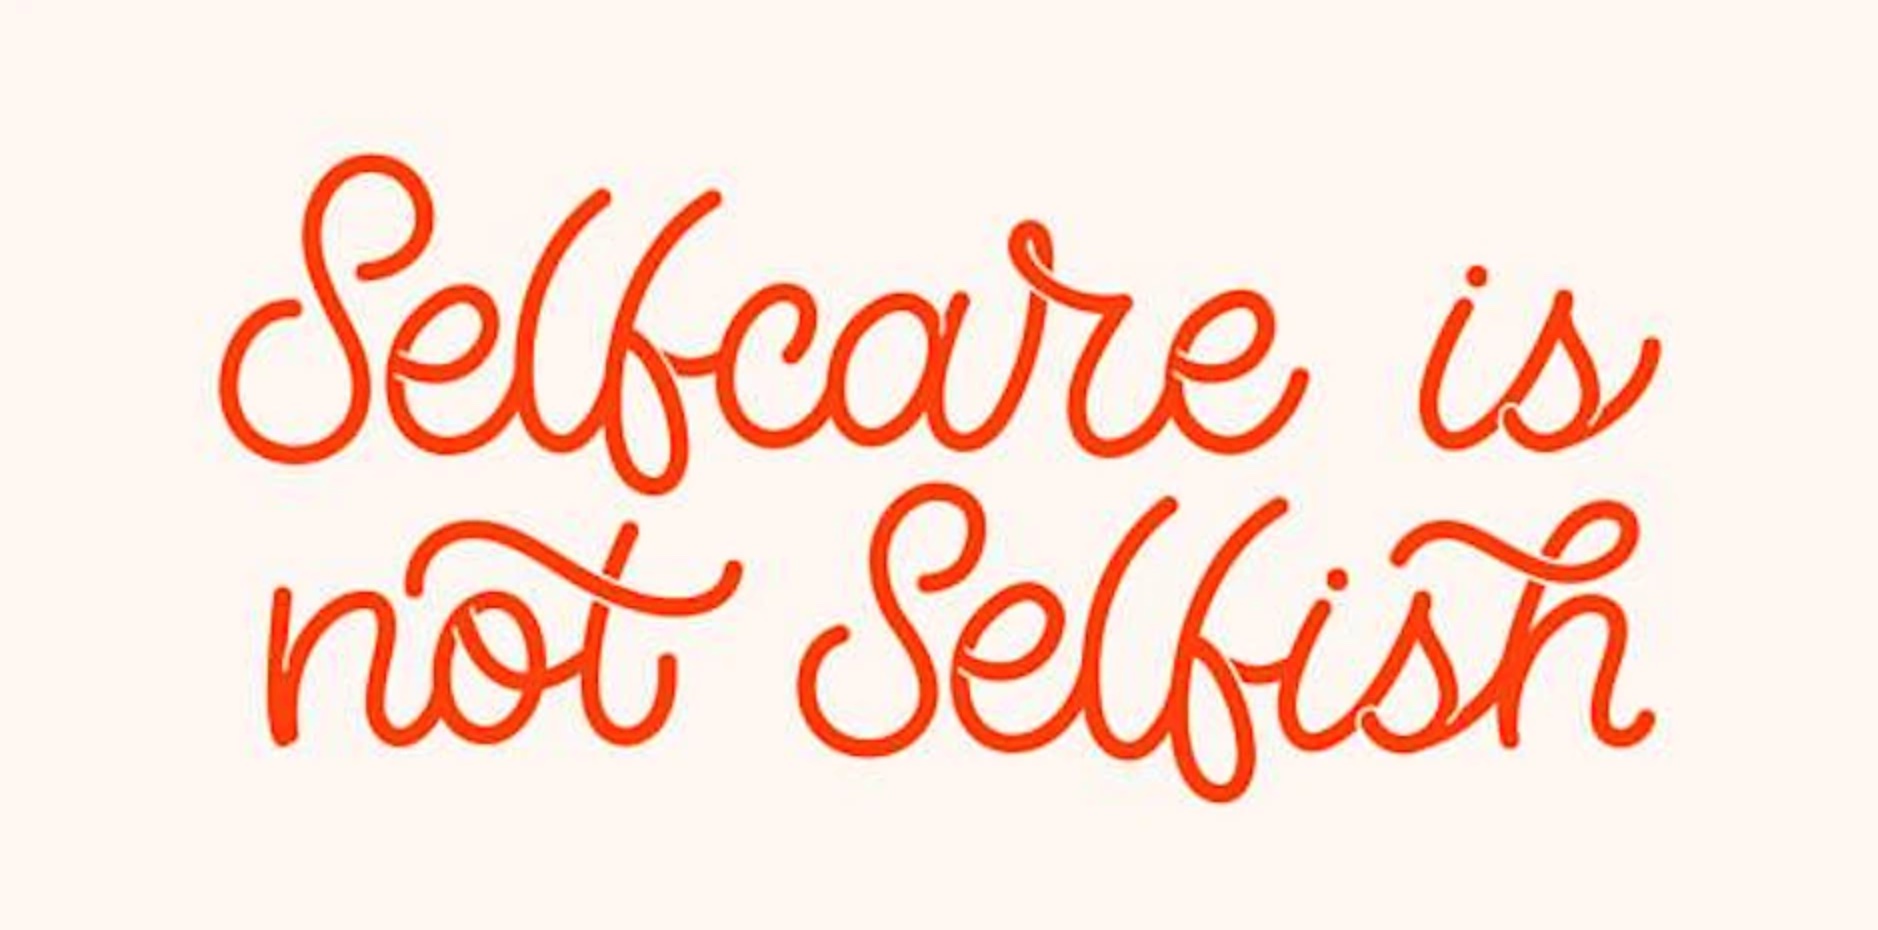 selfcare is not selfish